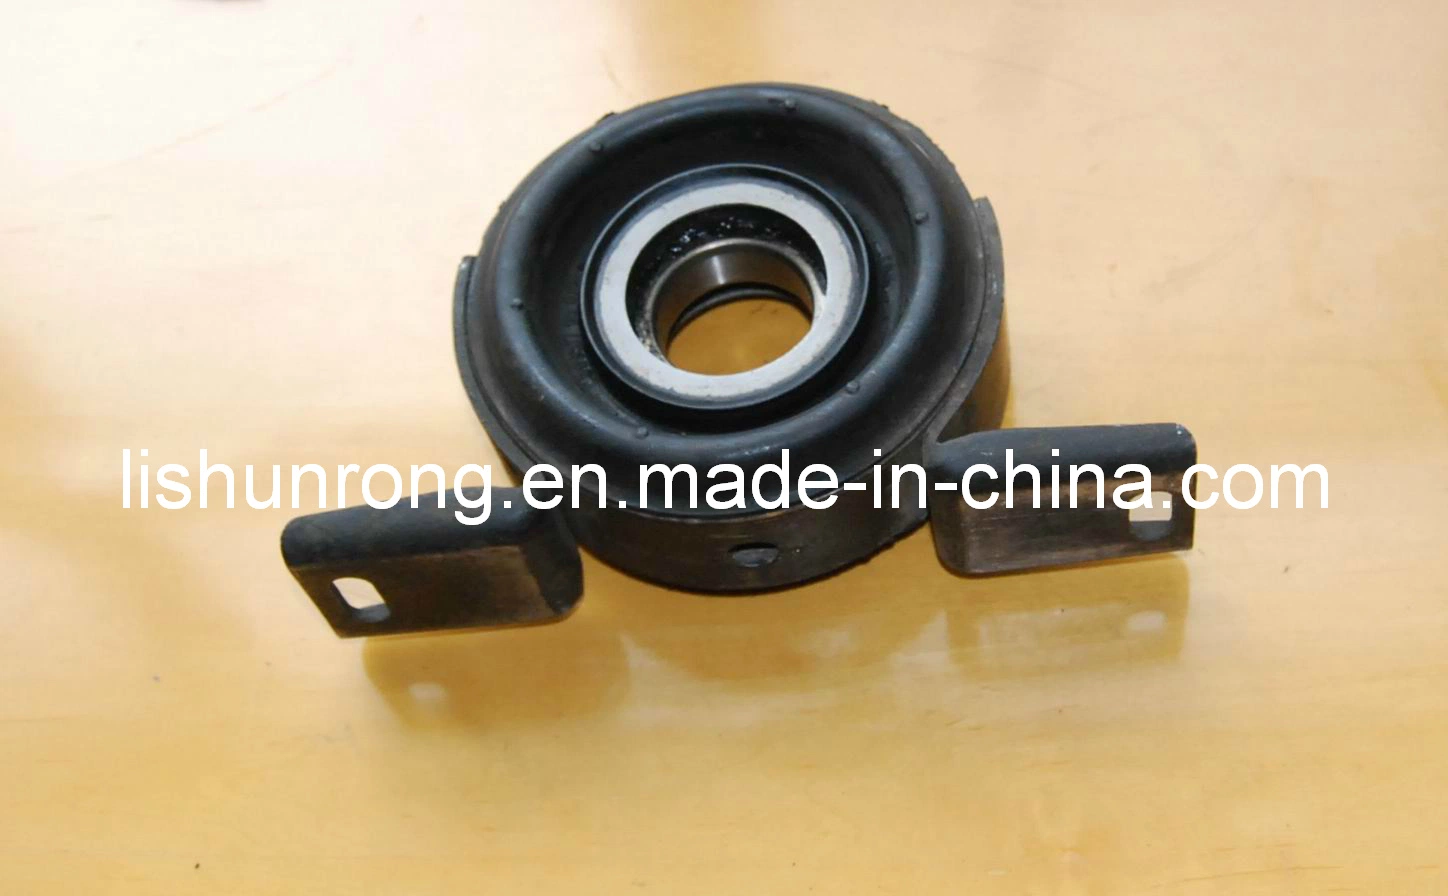 Center Bearing, Support Bearing for Drive Shafts, Cardan Shafts